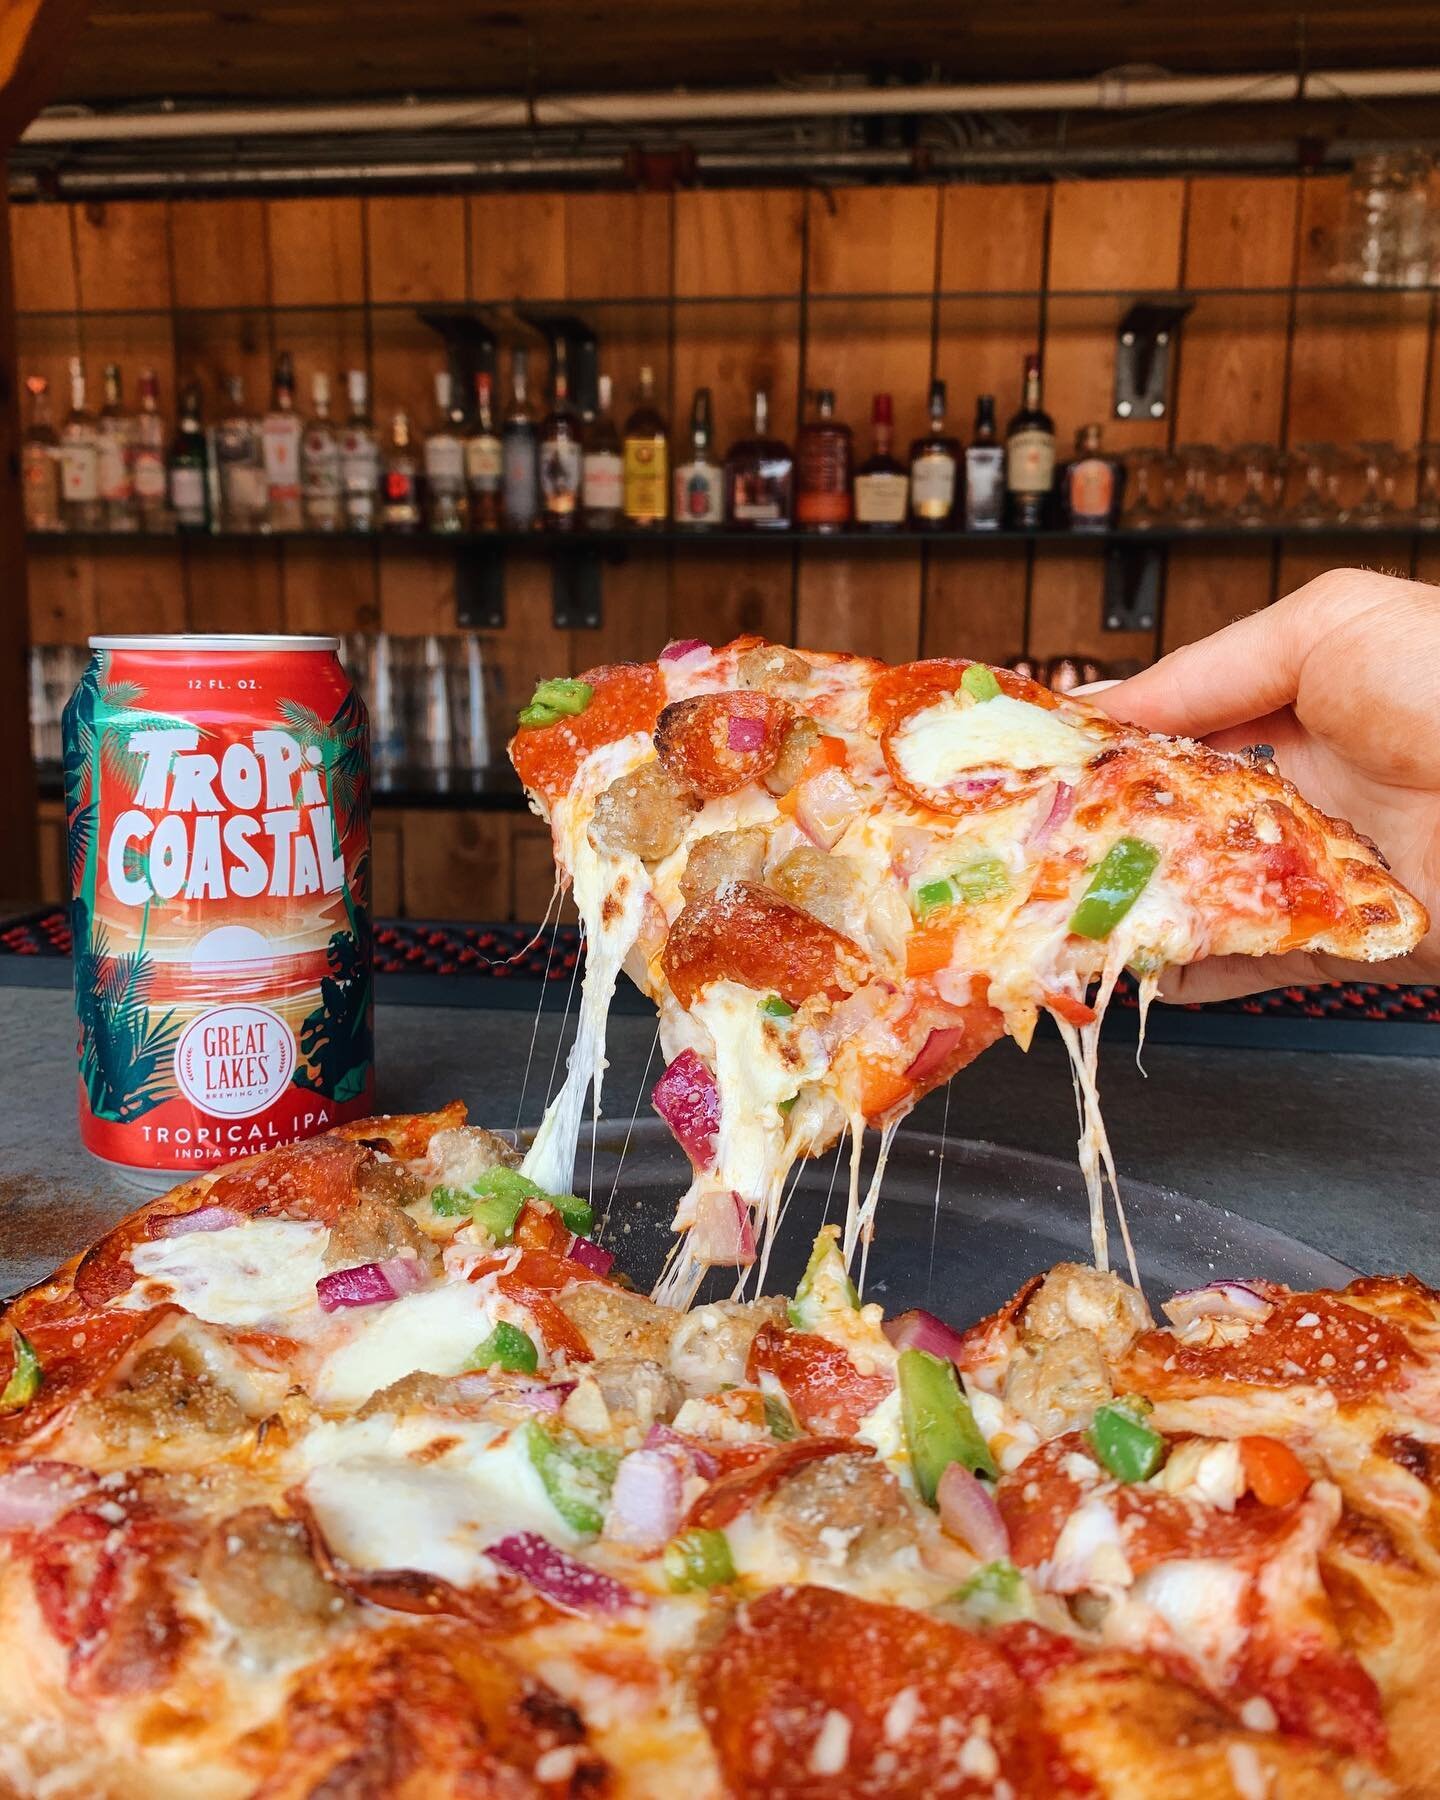 TGIF🍕🍺 Start your weekend off right with a hot pizza and a cold beer 🙌  Find all our delicious speciality za&rsquo;s at @thepamarket tonight 3-10pm!!

📸 Supreme Pizza